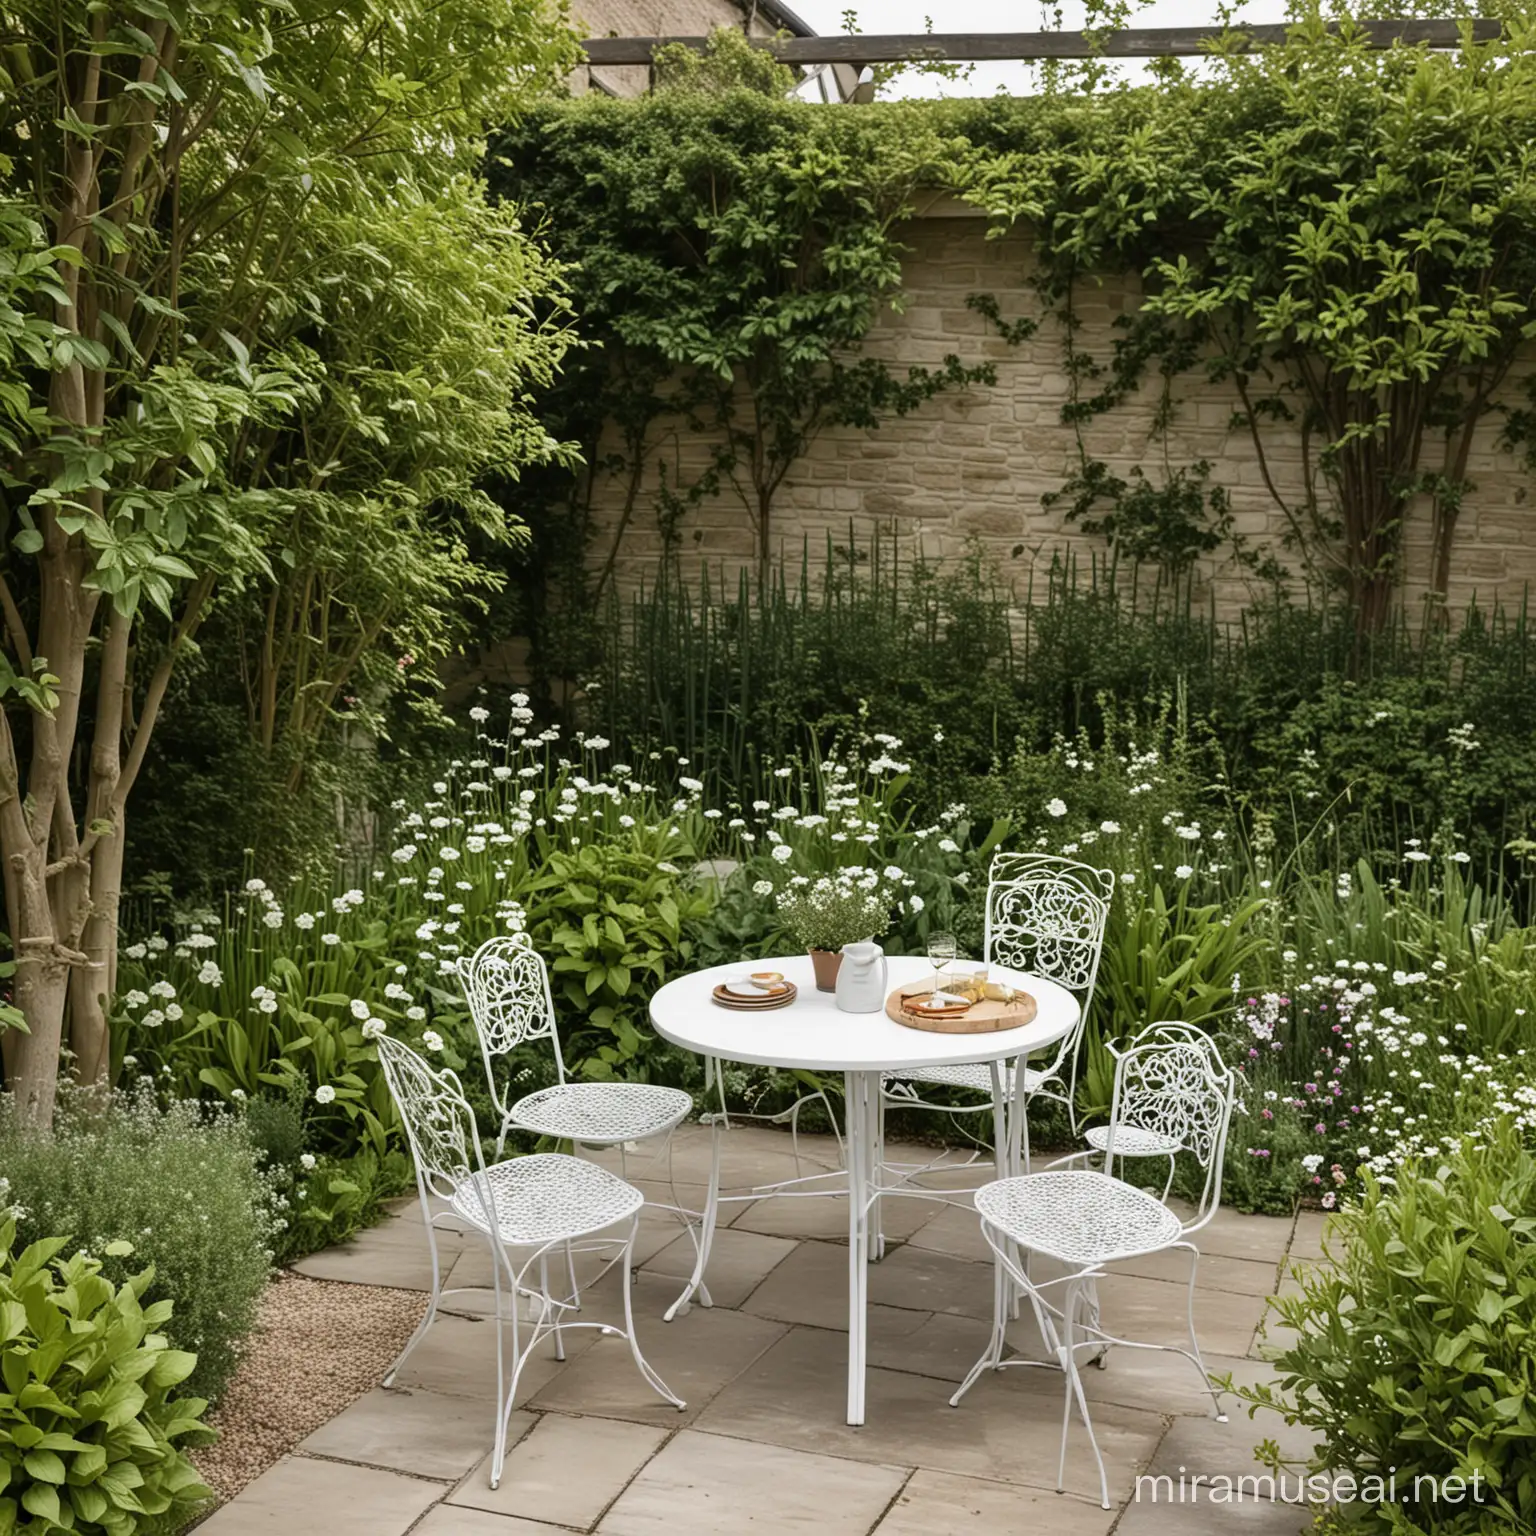 a garden with a white table and three chairs